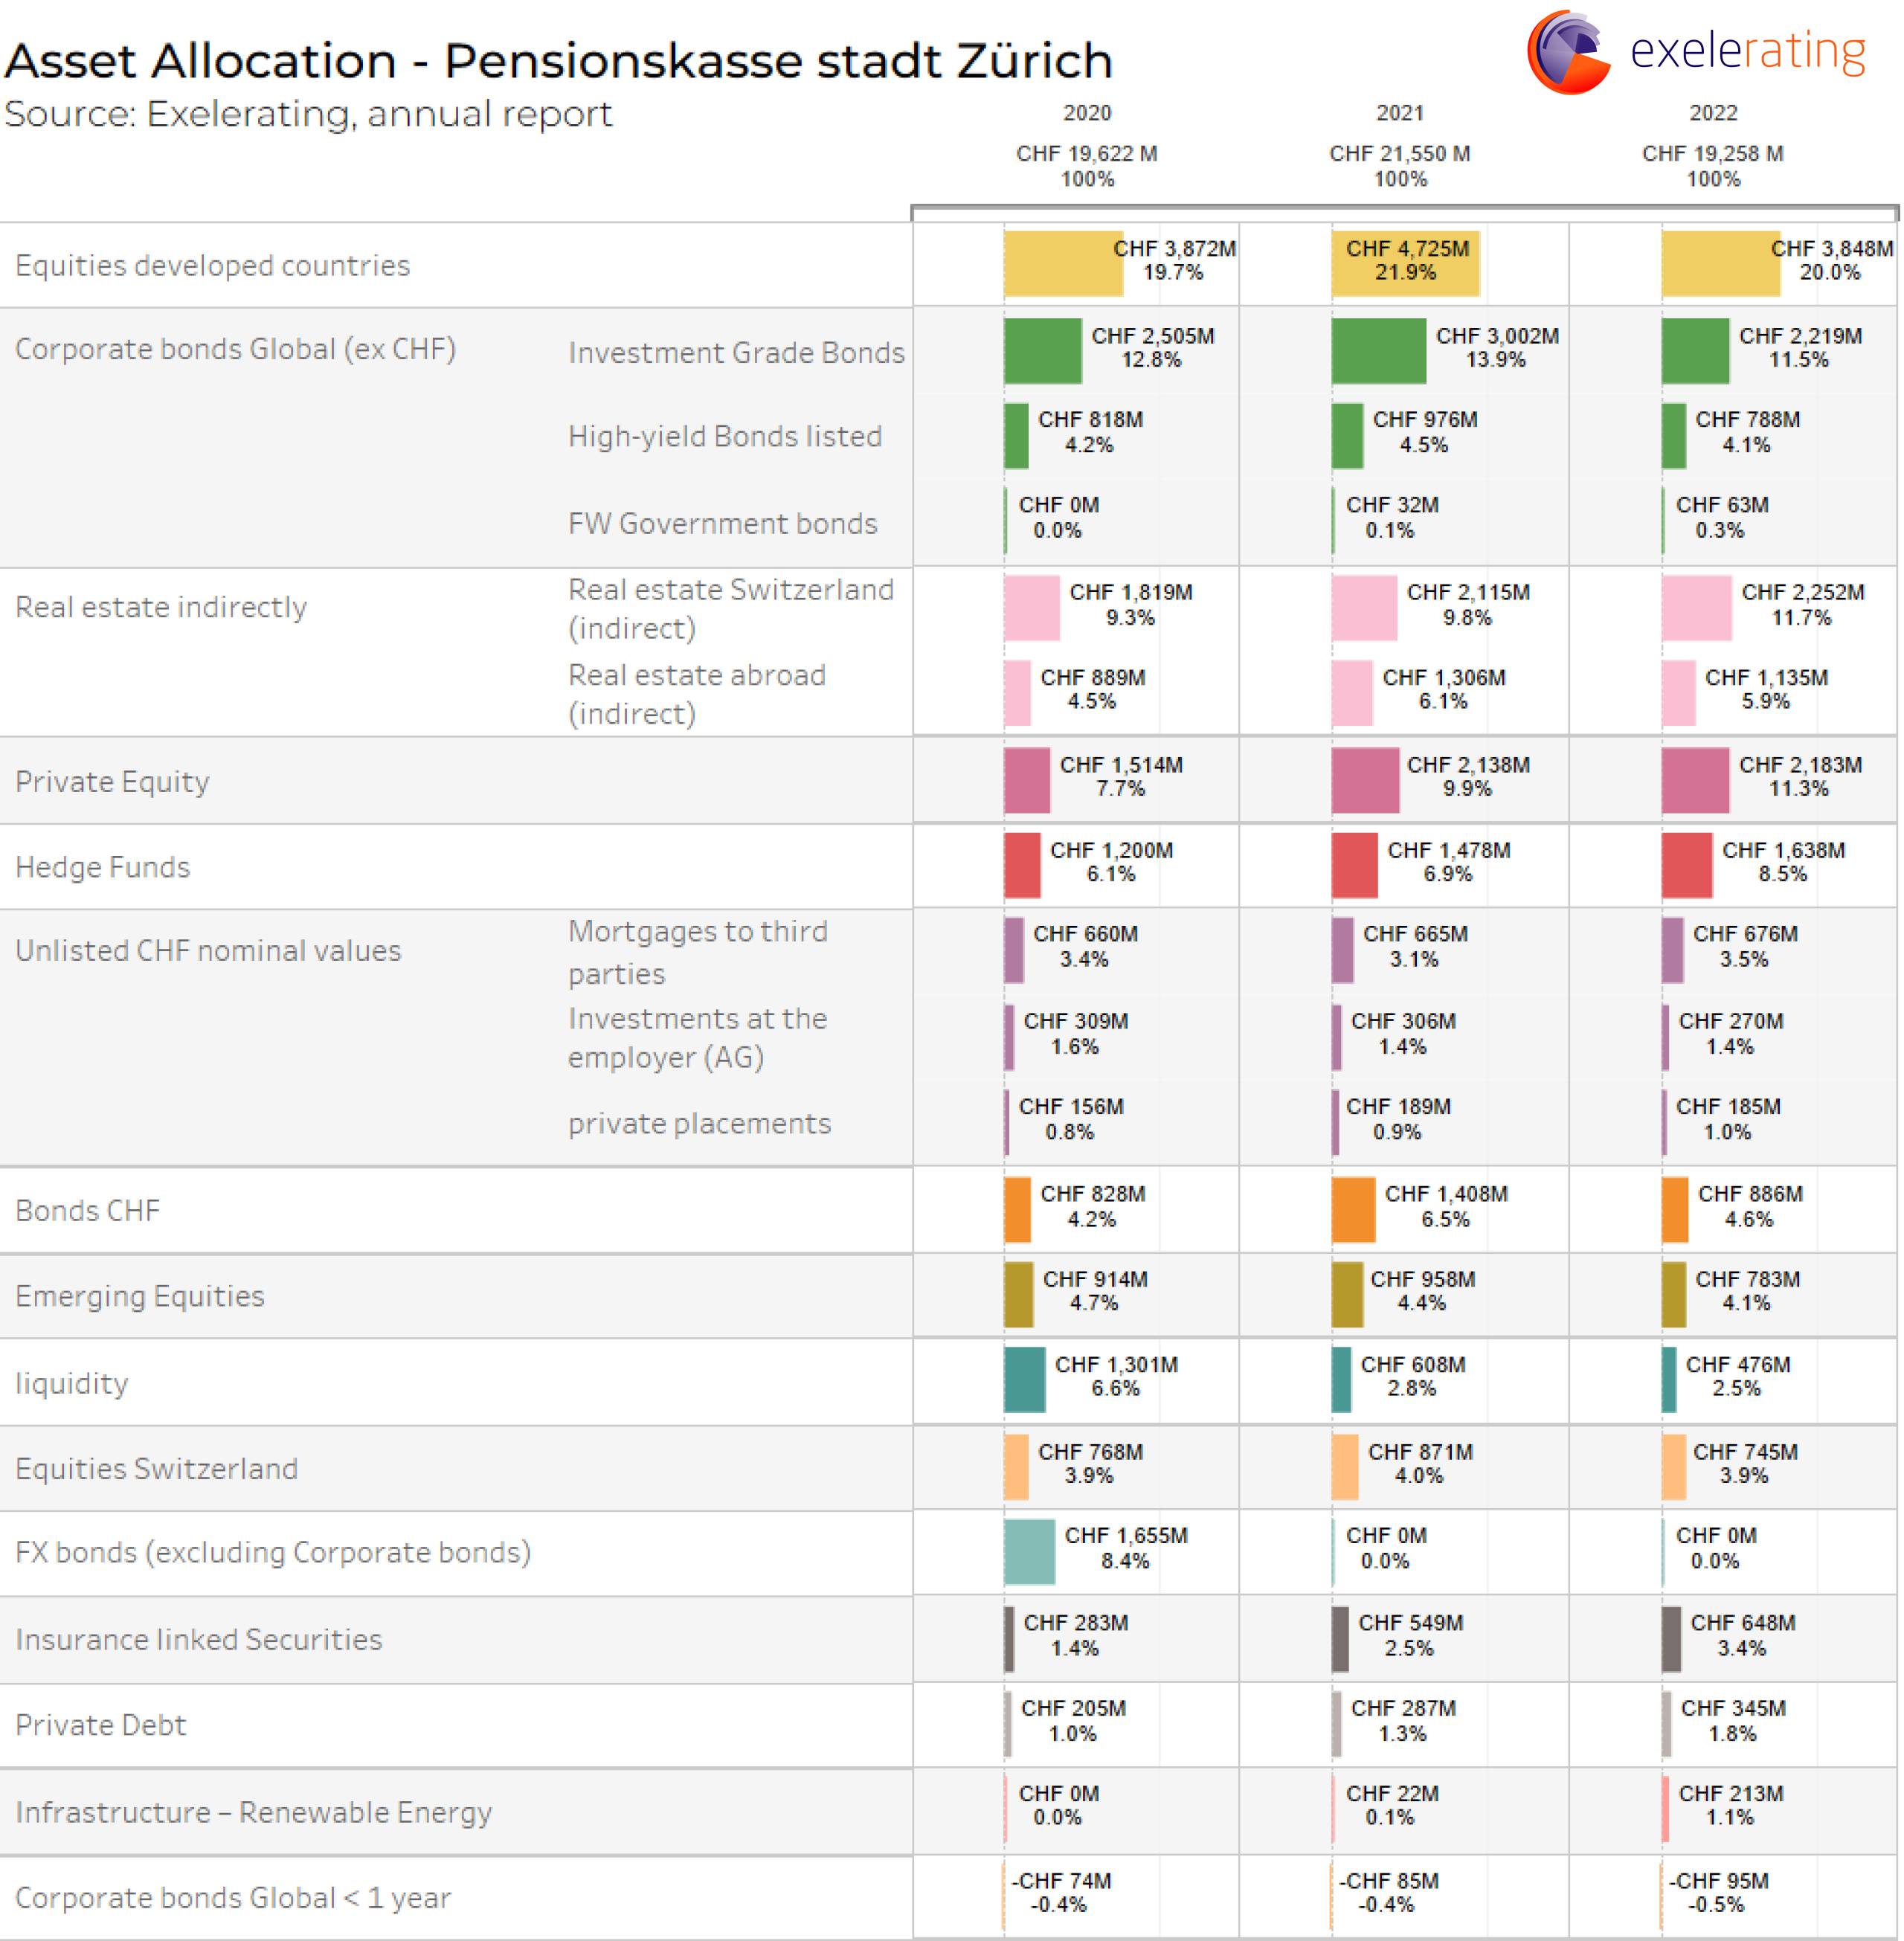 Breakdown of the asset allocation of the The Pensionskasse Stadt Zürich in a horizontal bar chart.